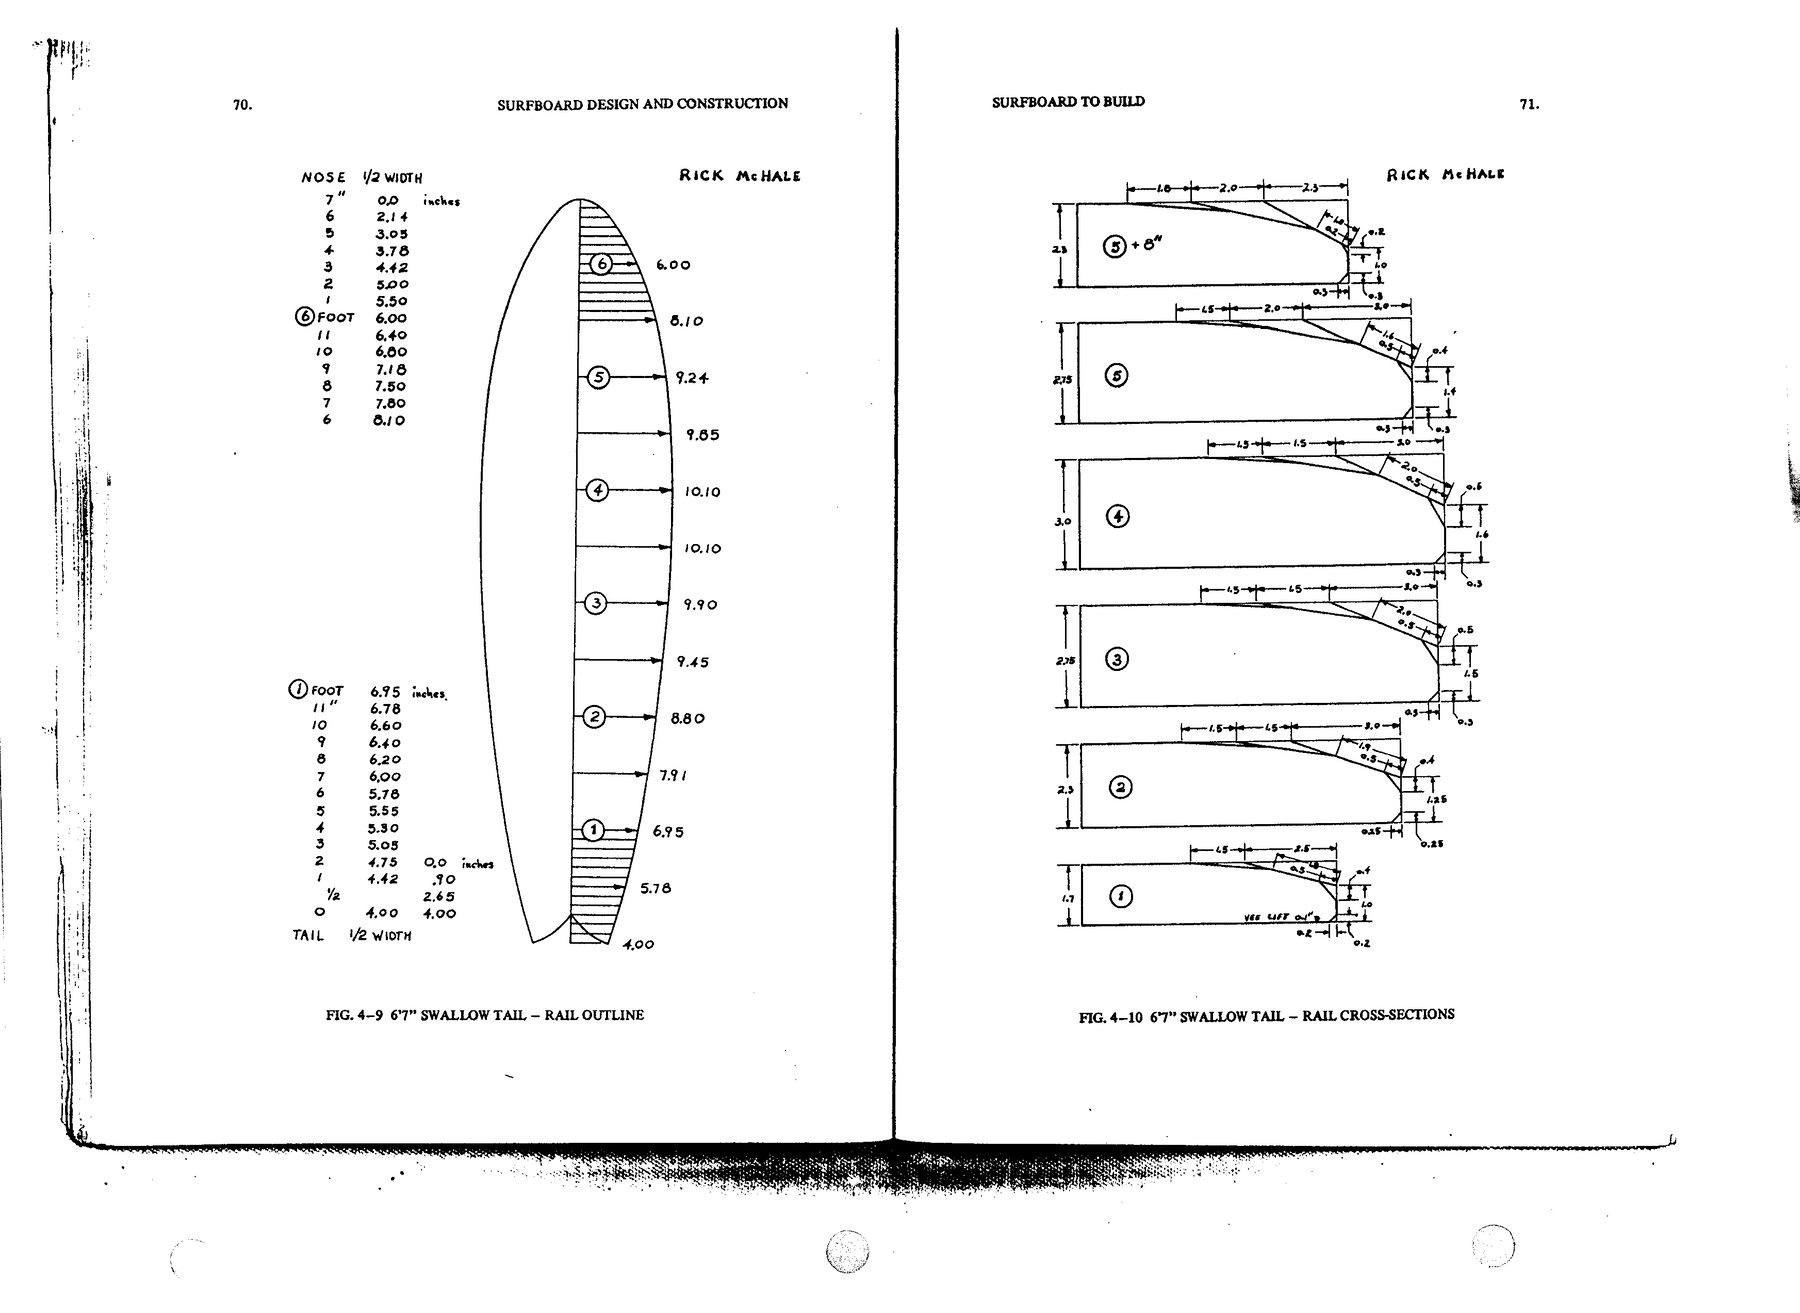 Surfboard Design and Construction Book 1977